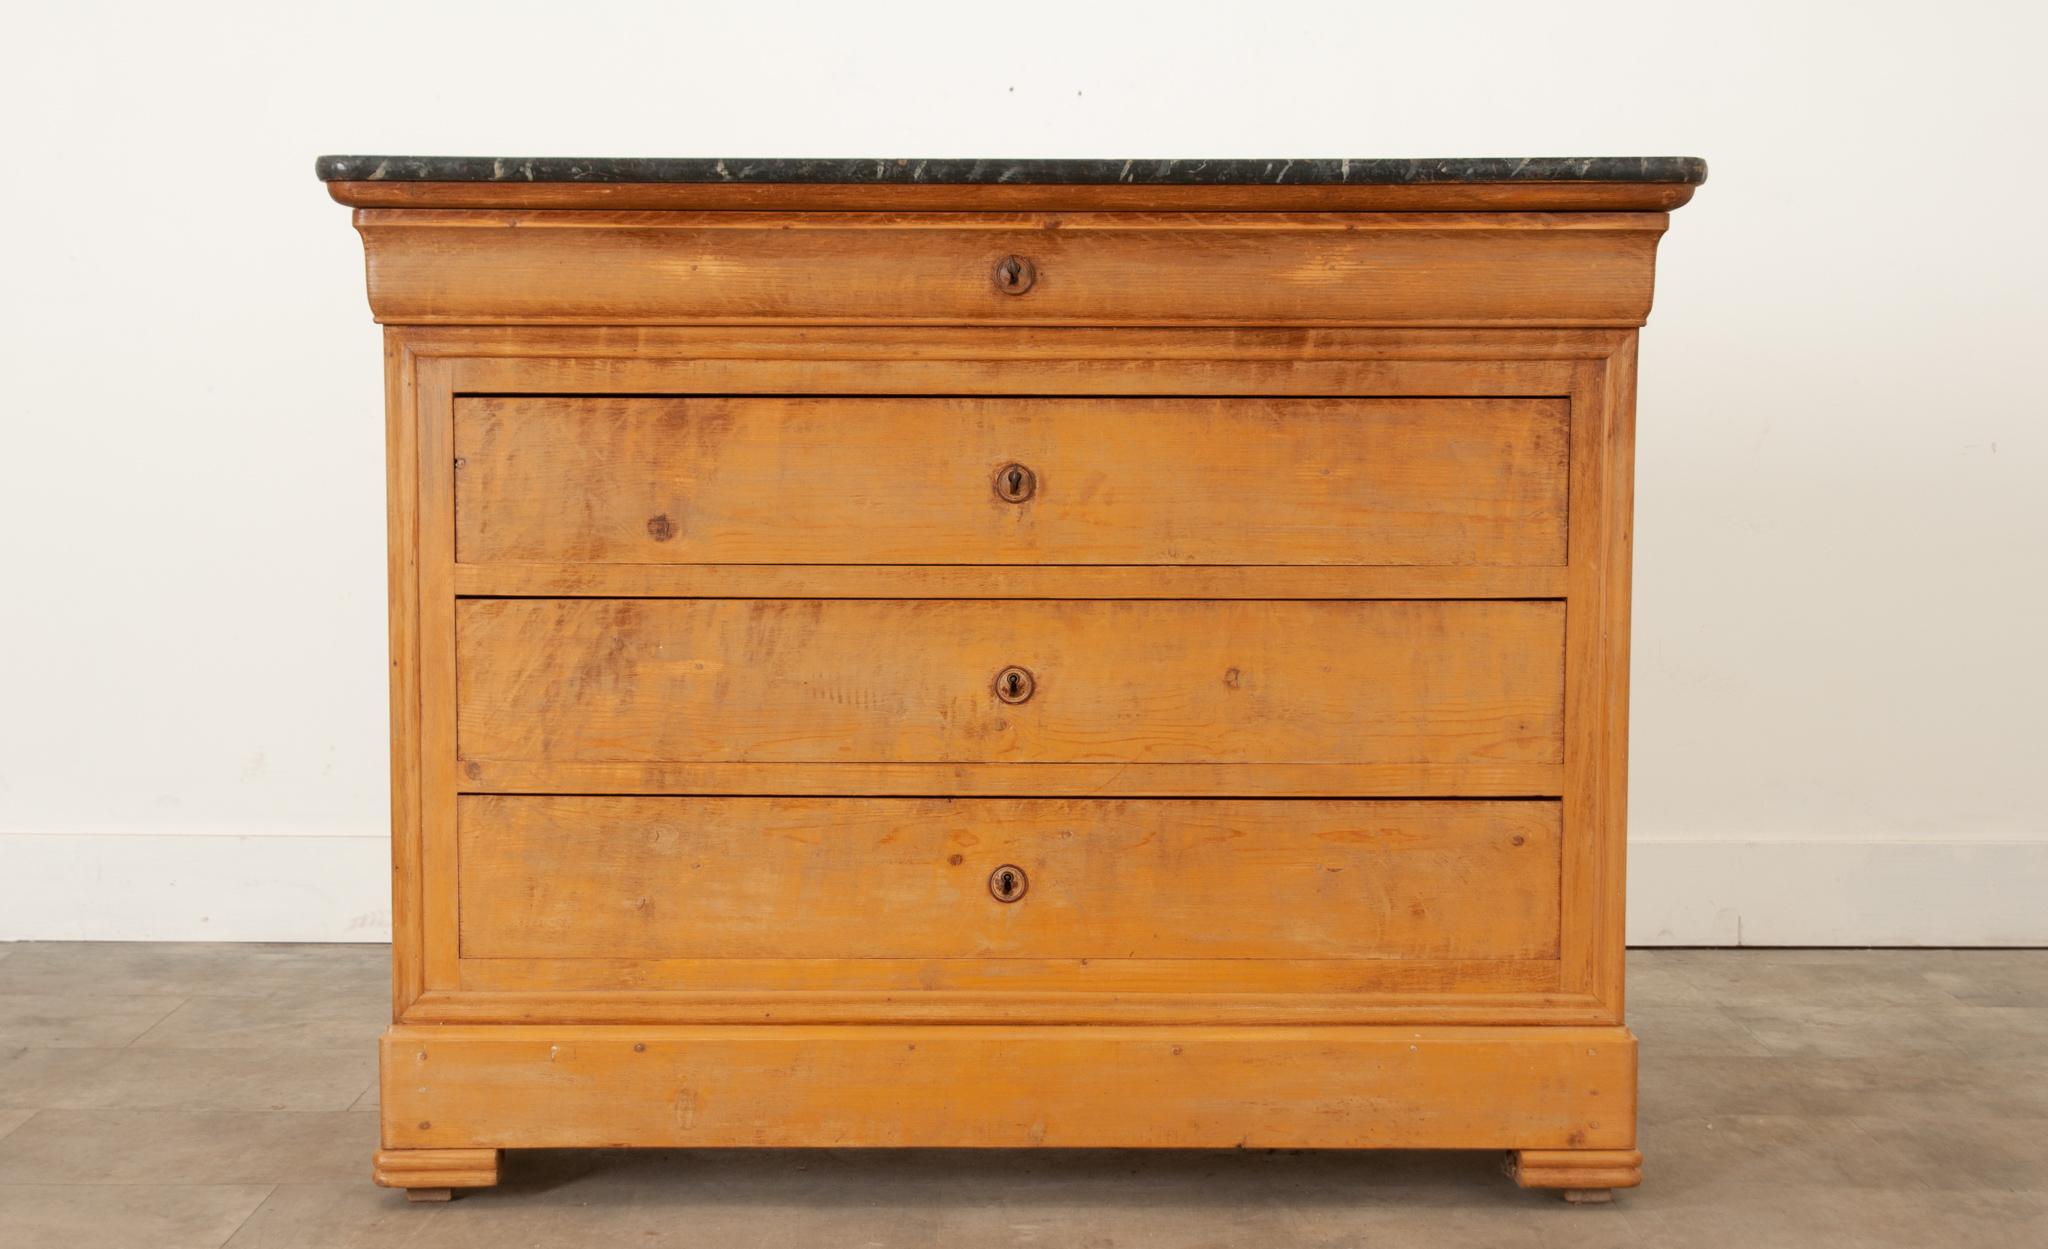 A French Louis-Phillipe painted commode circa 1850 with faux marble top and four drawers. Created in France during the 19th century, this lovely commode features a very interesting and unique rectangular faux marble top with rounded corners, sitting